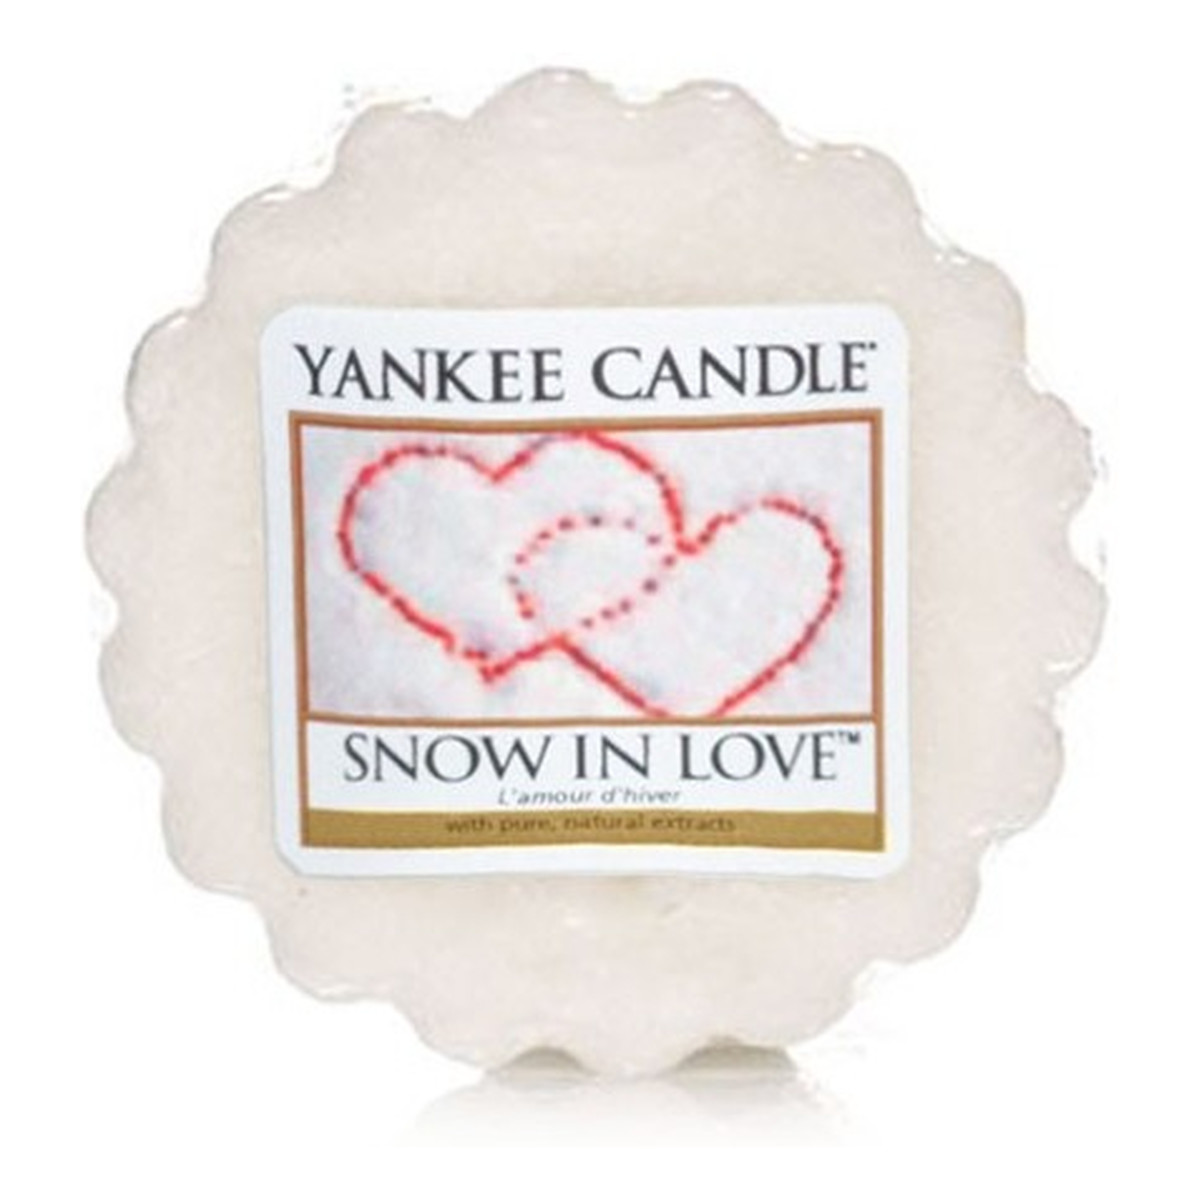 Yankee Candle Wax wosk zapachowy Snow In Love 22g